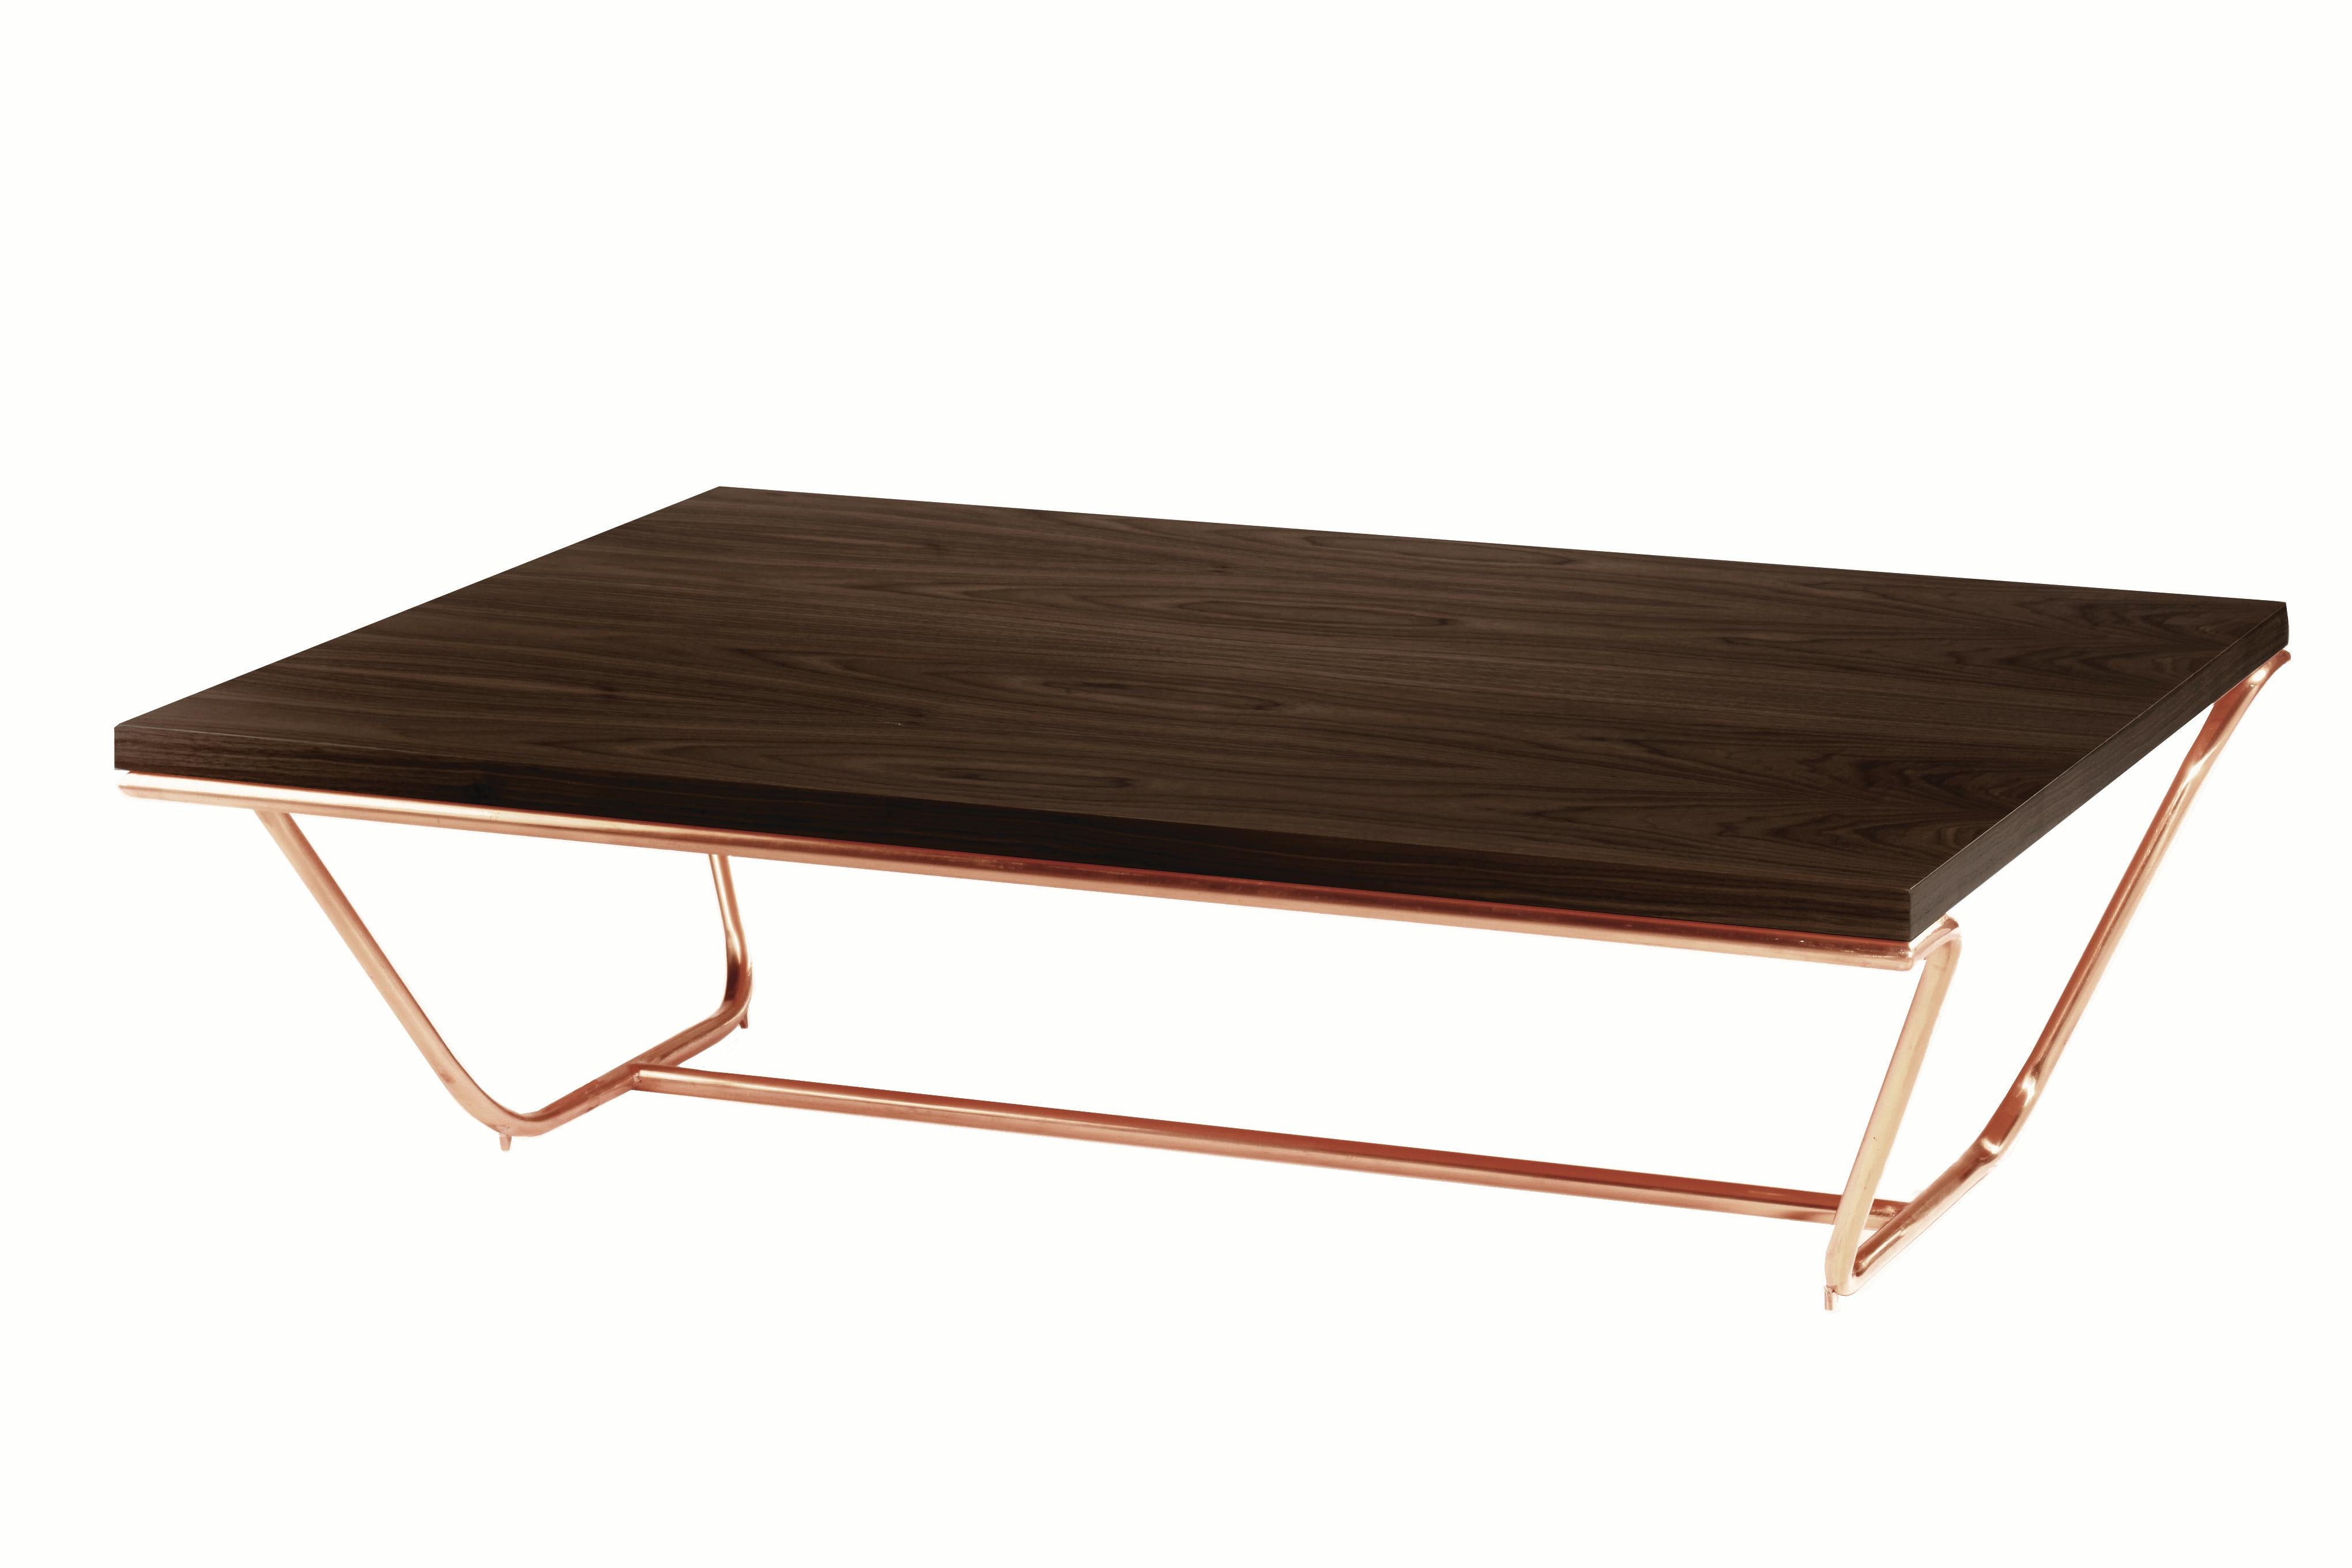 Brass or copper arms hold a luxurious wooden table top. These tables' elegance, with elements smoothly joined together, the base embracing the top, have almost a palpable musical presence to be discovered. Smooth reflection from the polished metal